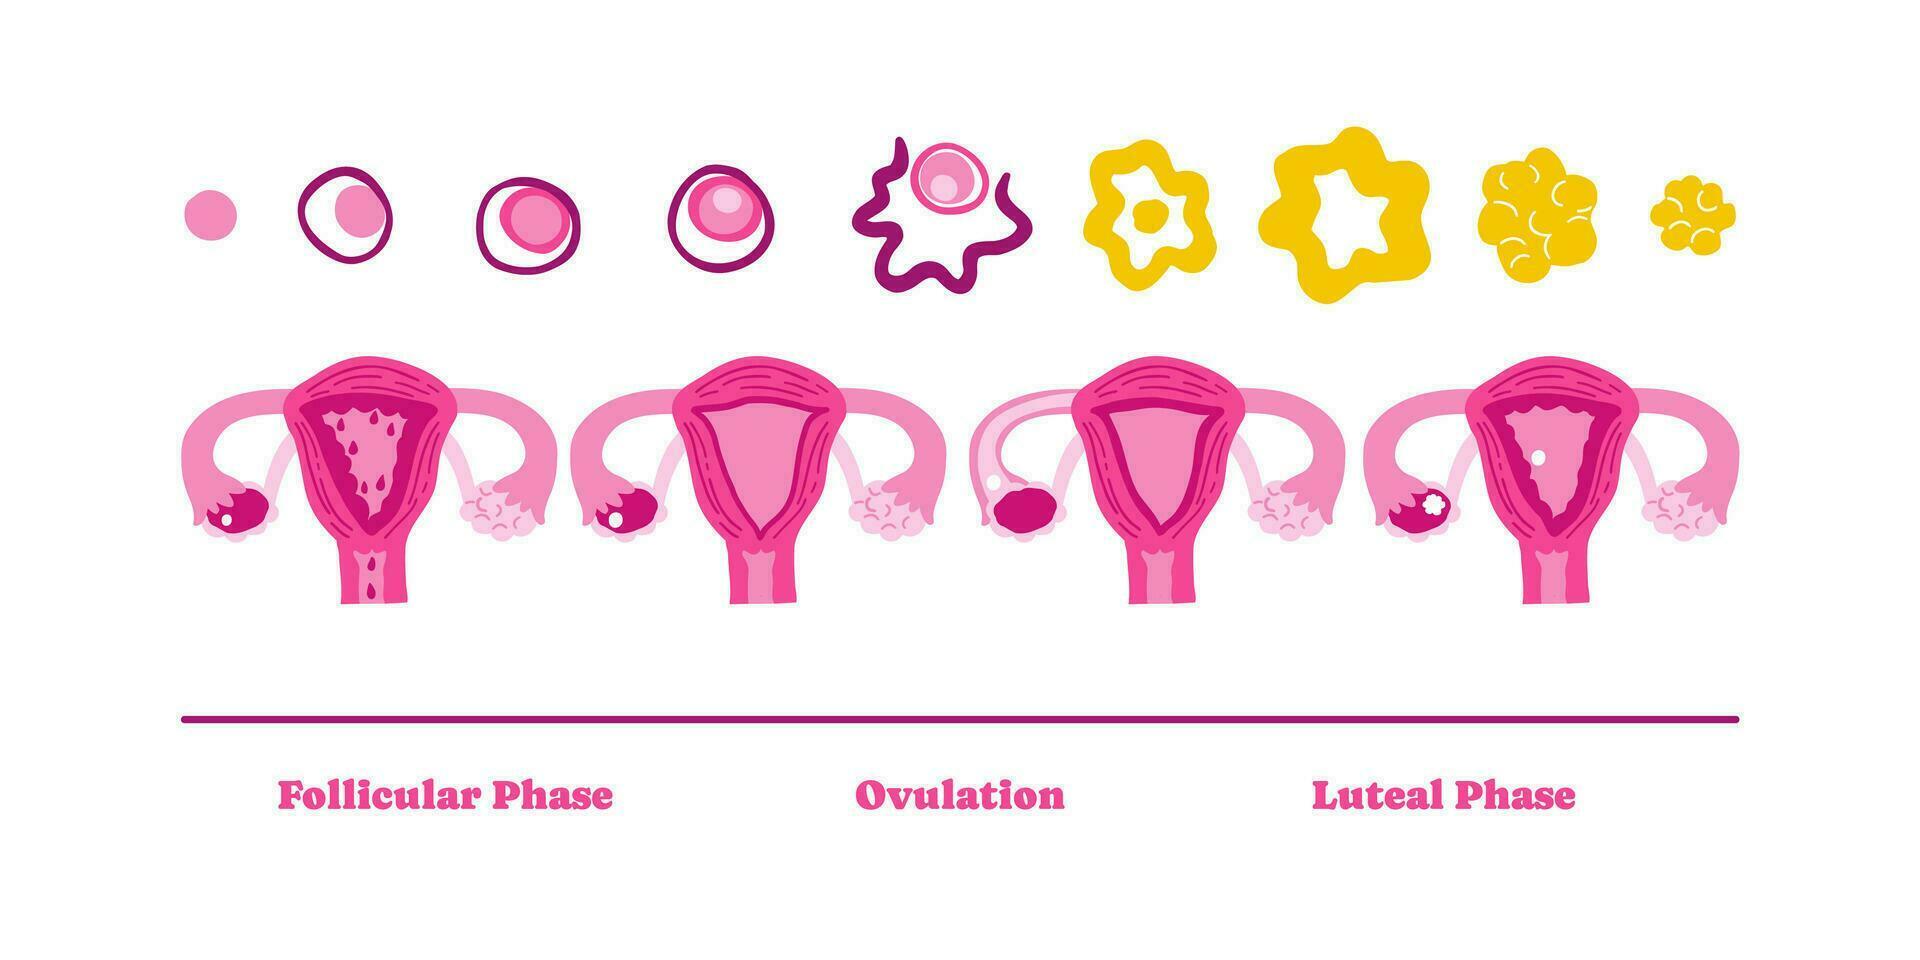 Menstrual cycle stages infographic illustration. Female uterus, woman. Vector illustration in flat style.